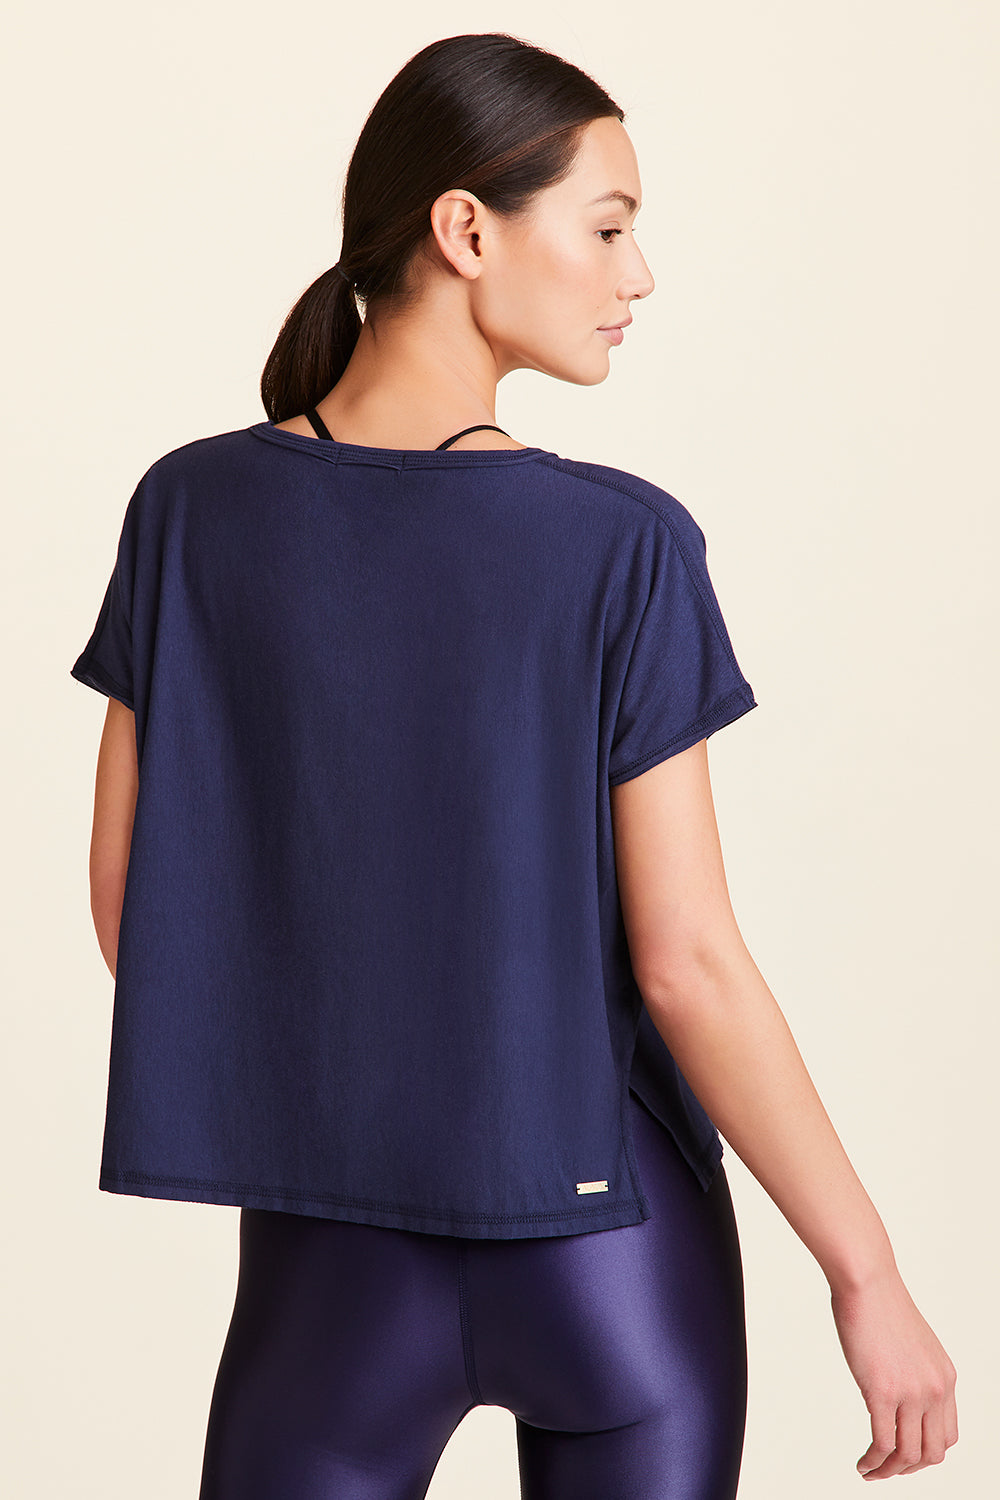 Back view of Alala Women's Luxury Athleisure super-soft tee in solid Navy